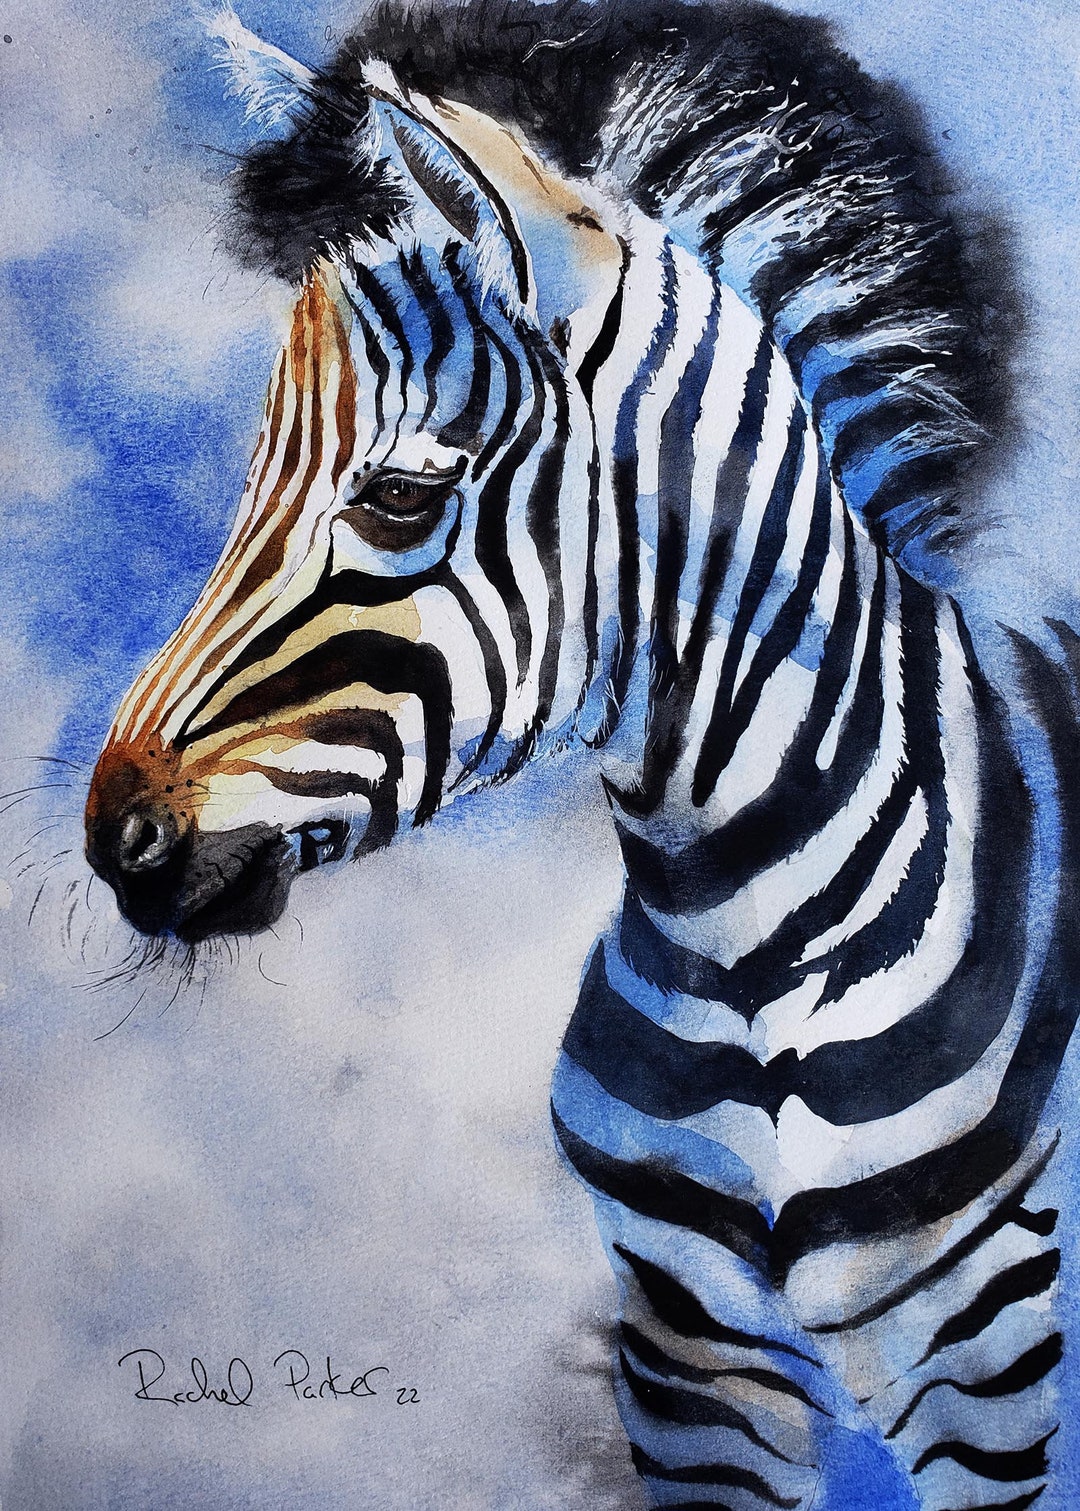 Easy Rainbow Zebra Acrylic painting tutorial step by step Live Streaming